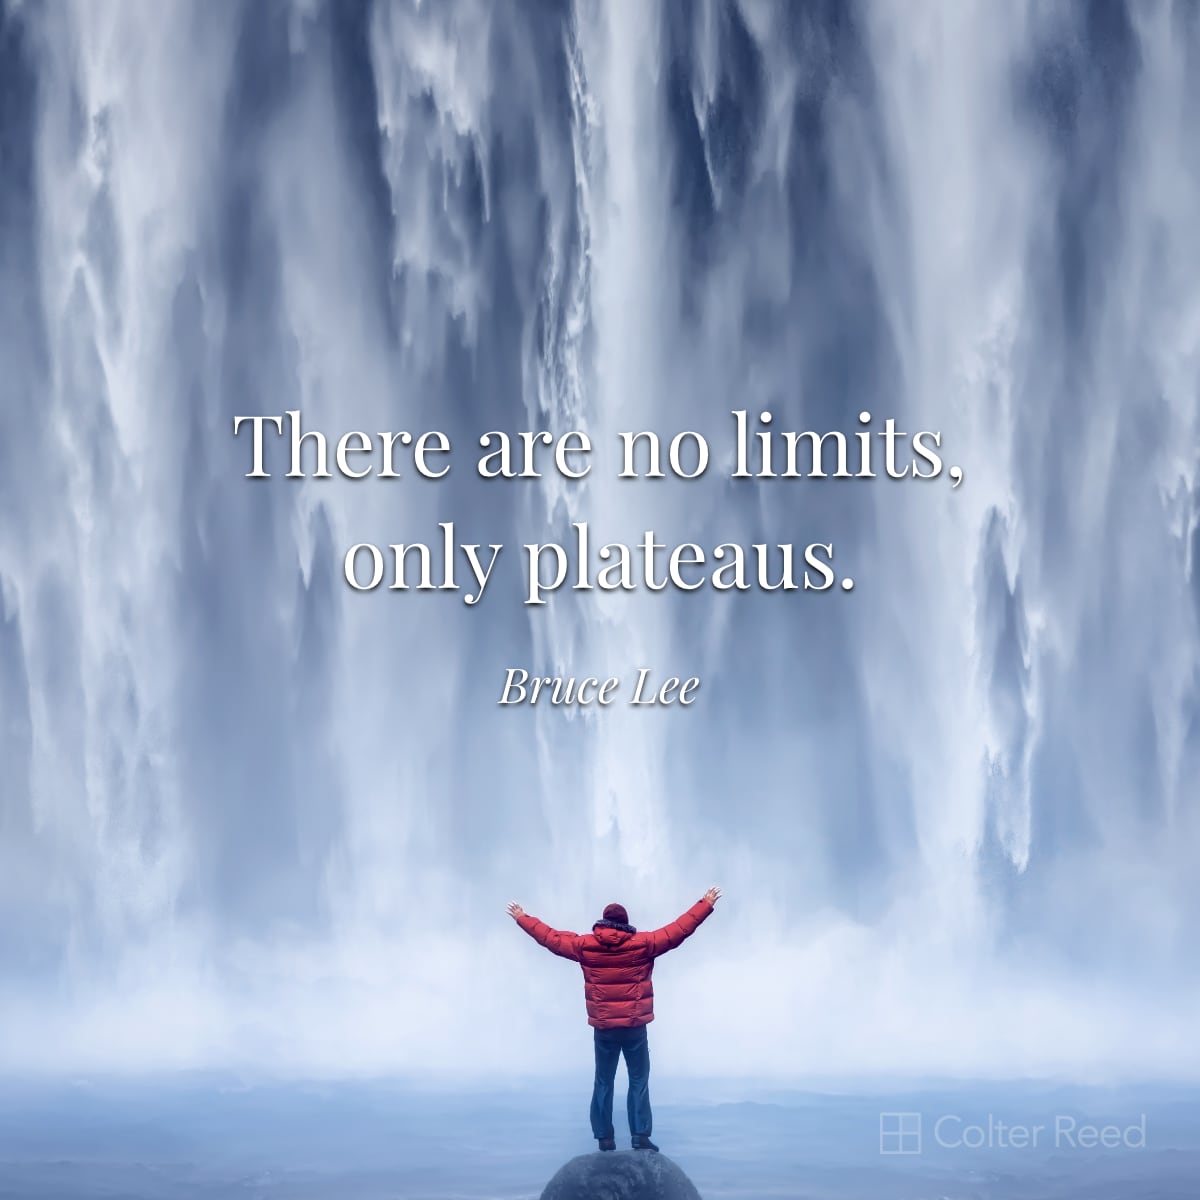 There are no limits, only plateaus. —Bruce Lee